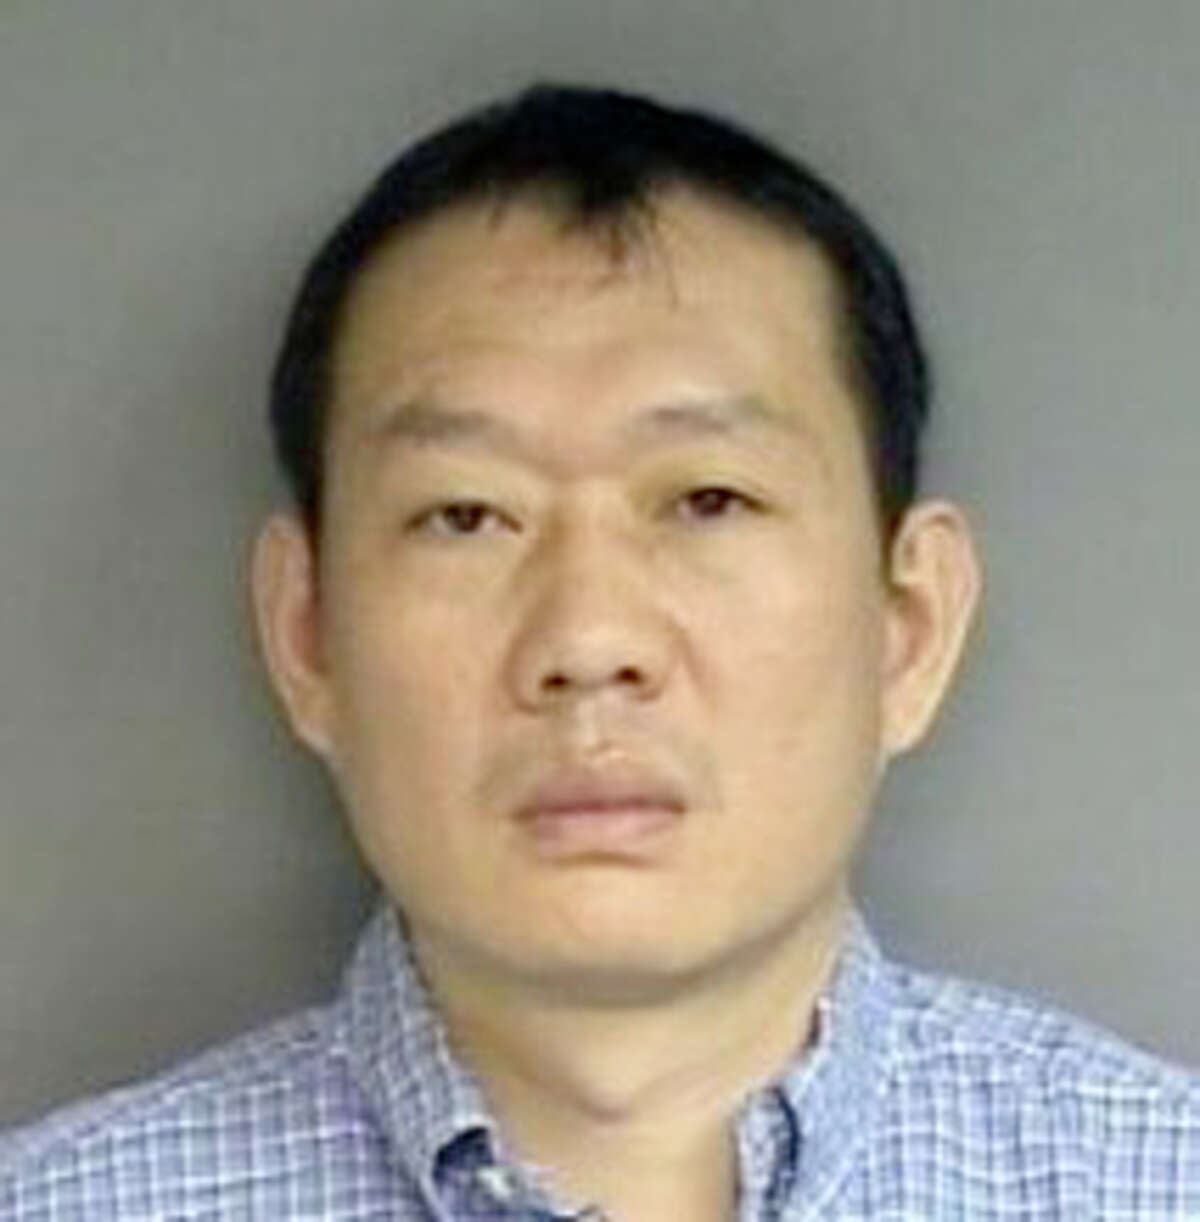 Stamford Police Department booking photo of Guangfu Zhao.